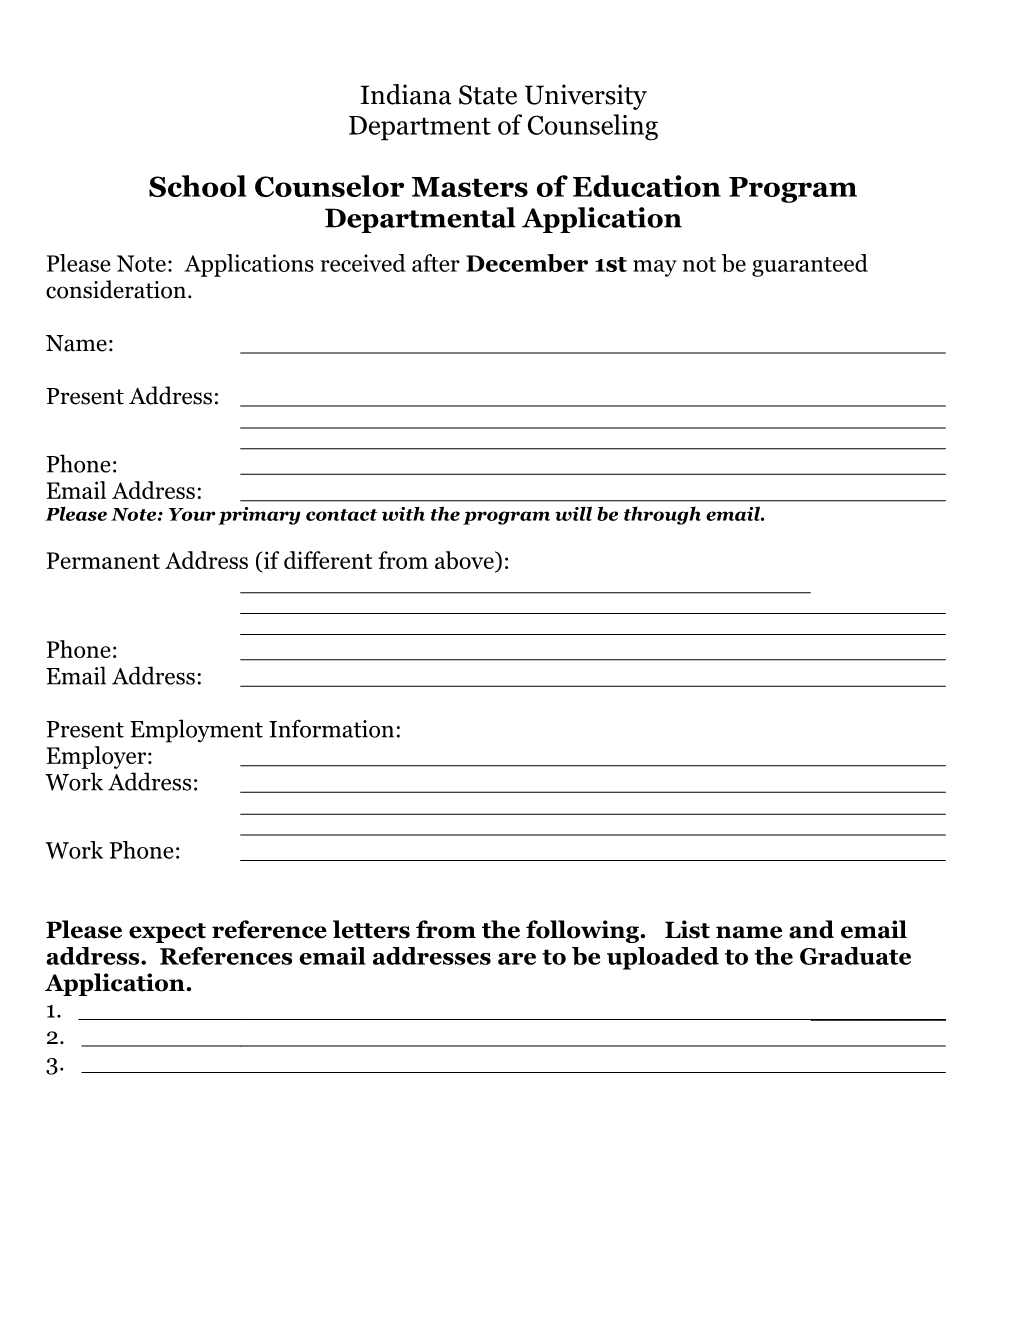 School Counselor Masters of Education Program